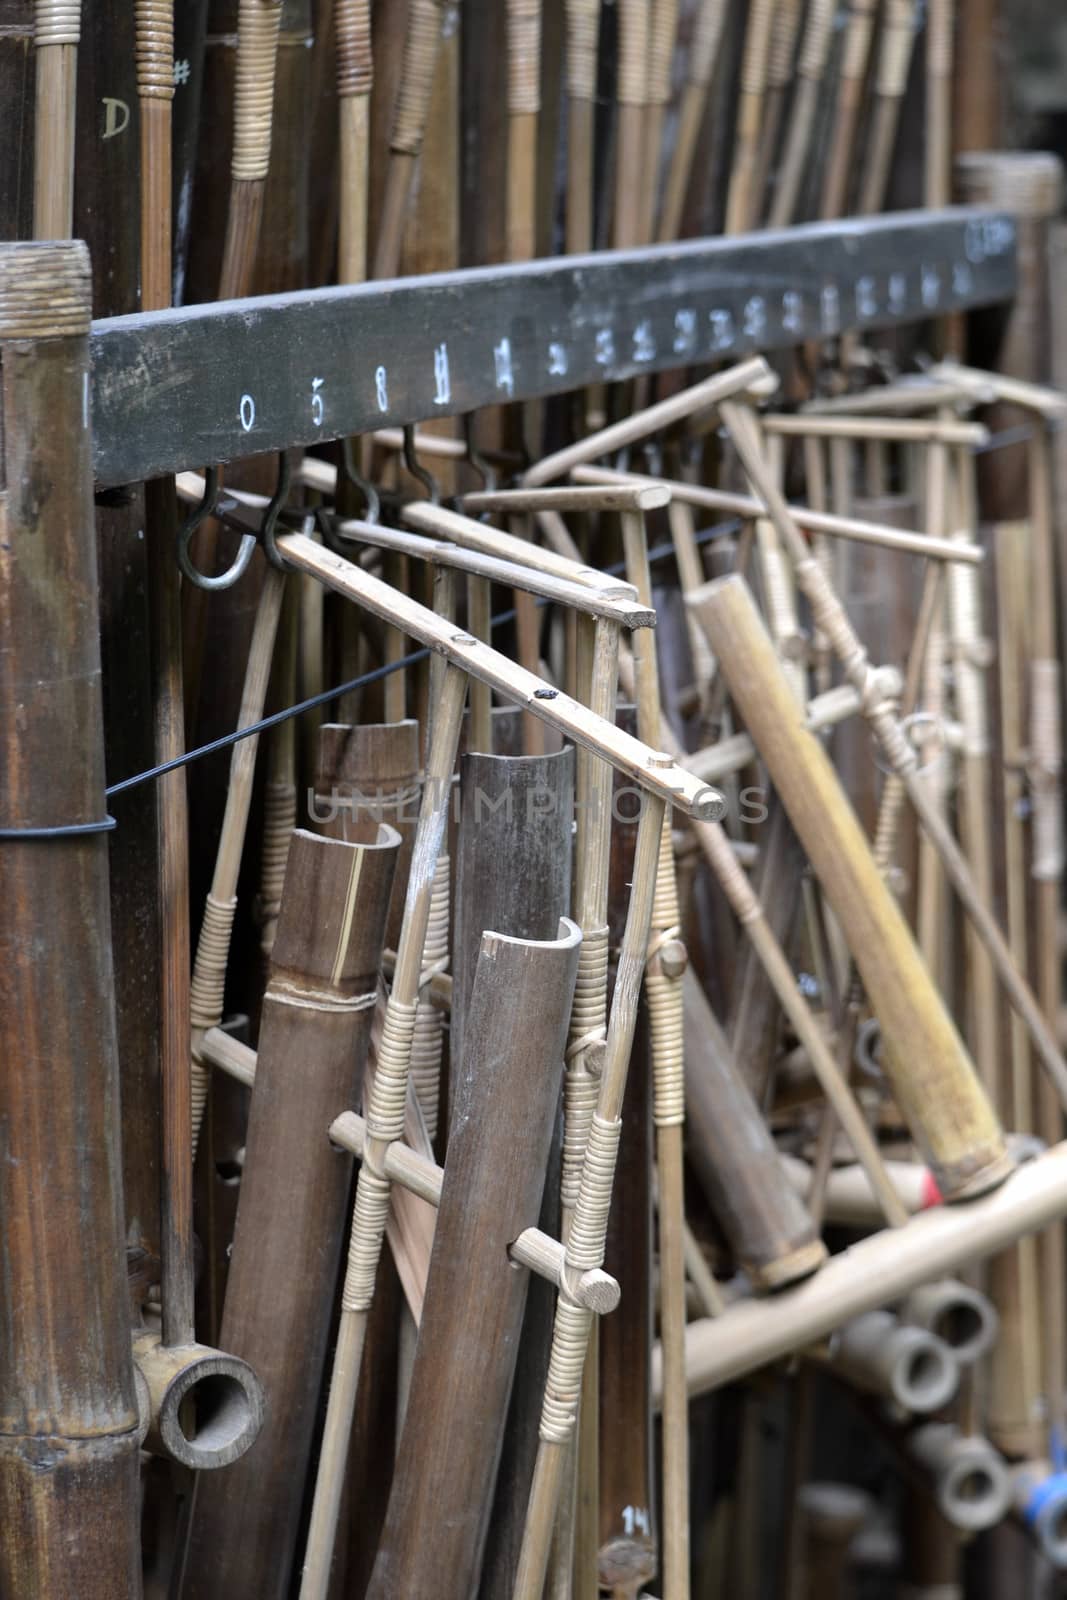 angklung is traditional musical heritage made from bamboo and worldwide recognize originally from indonesia